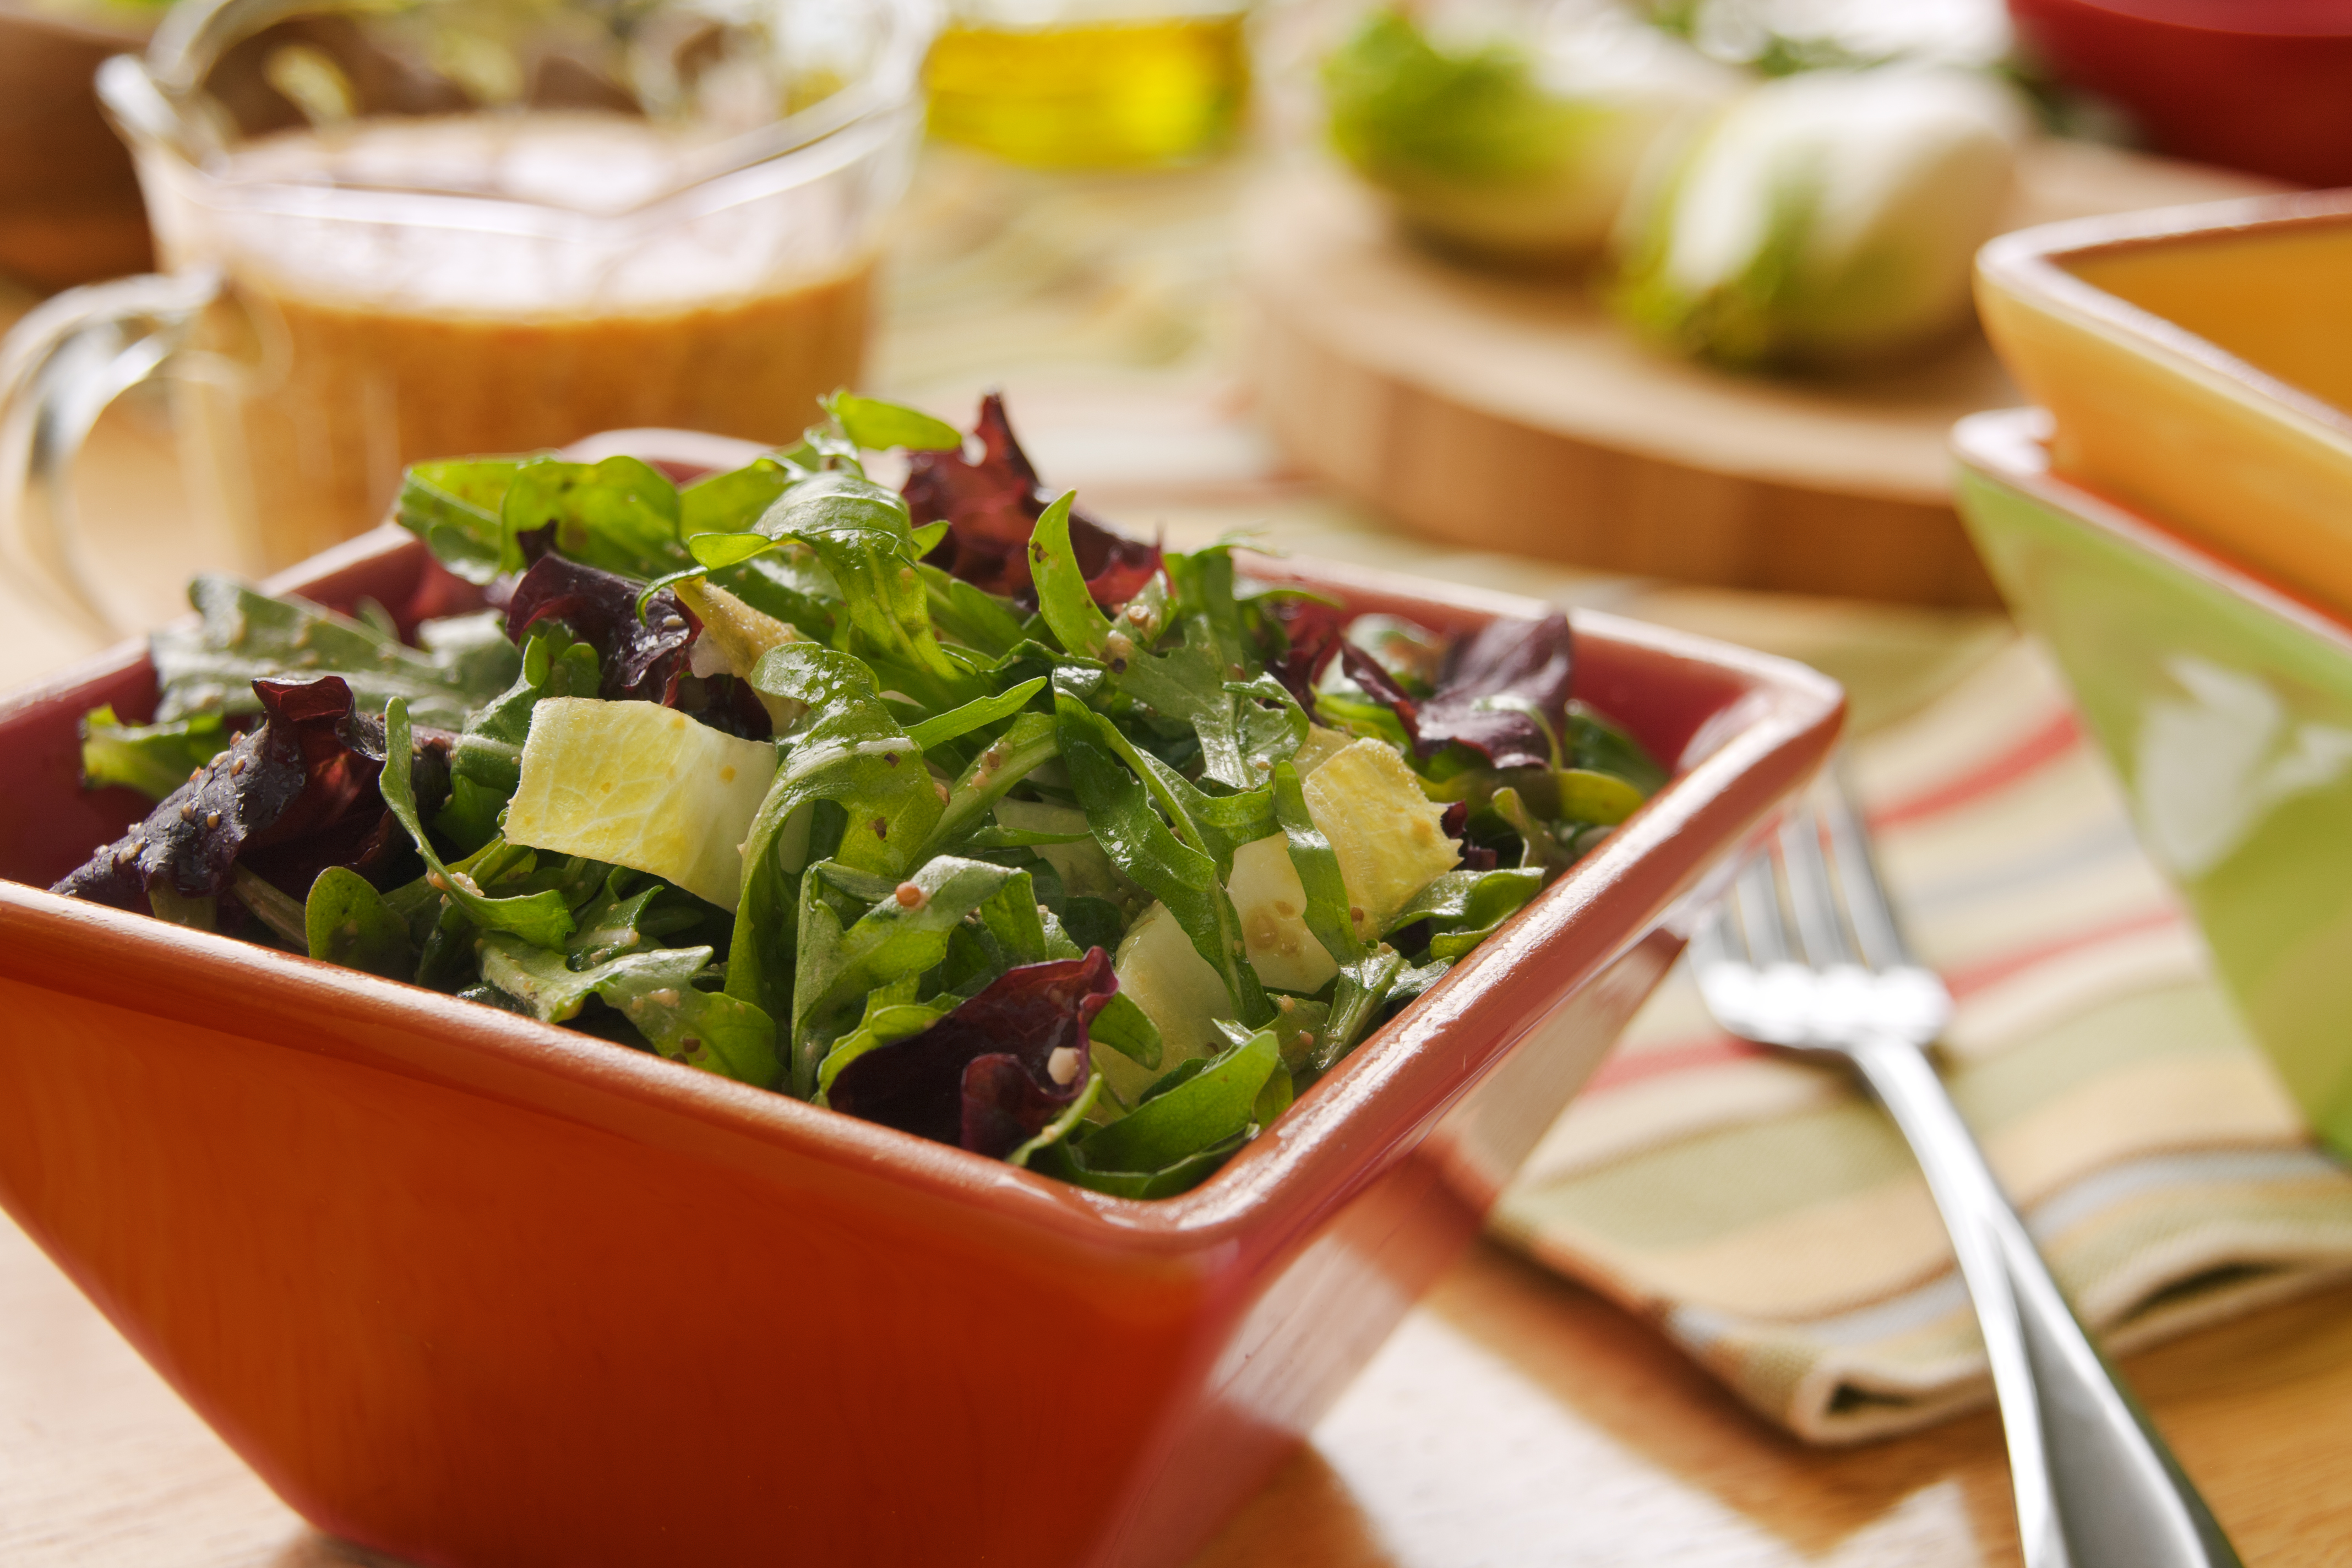 Mixed Greens with Mustard Dressing